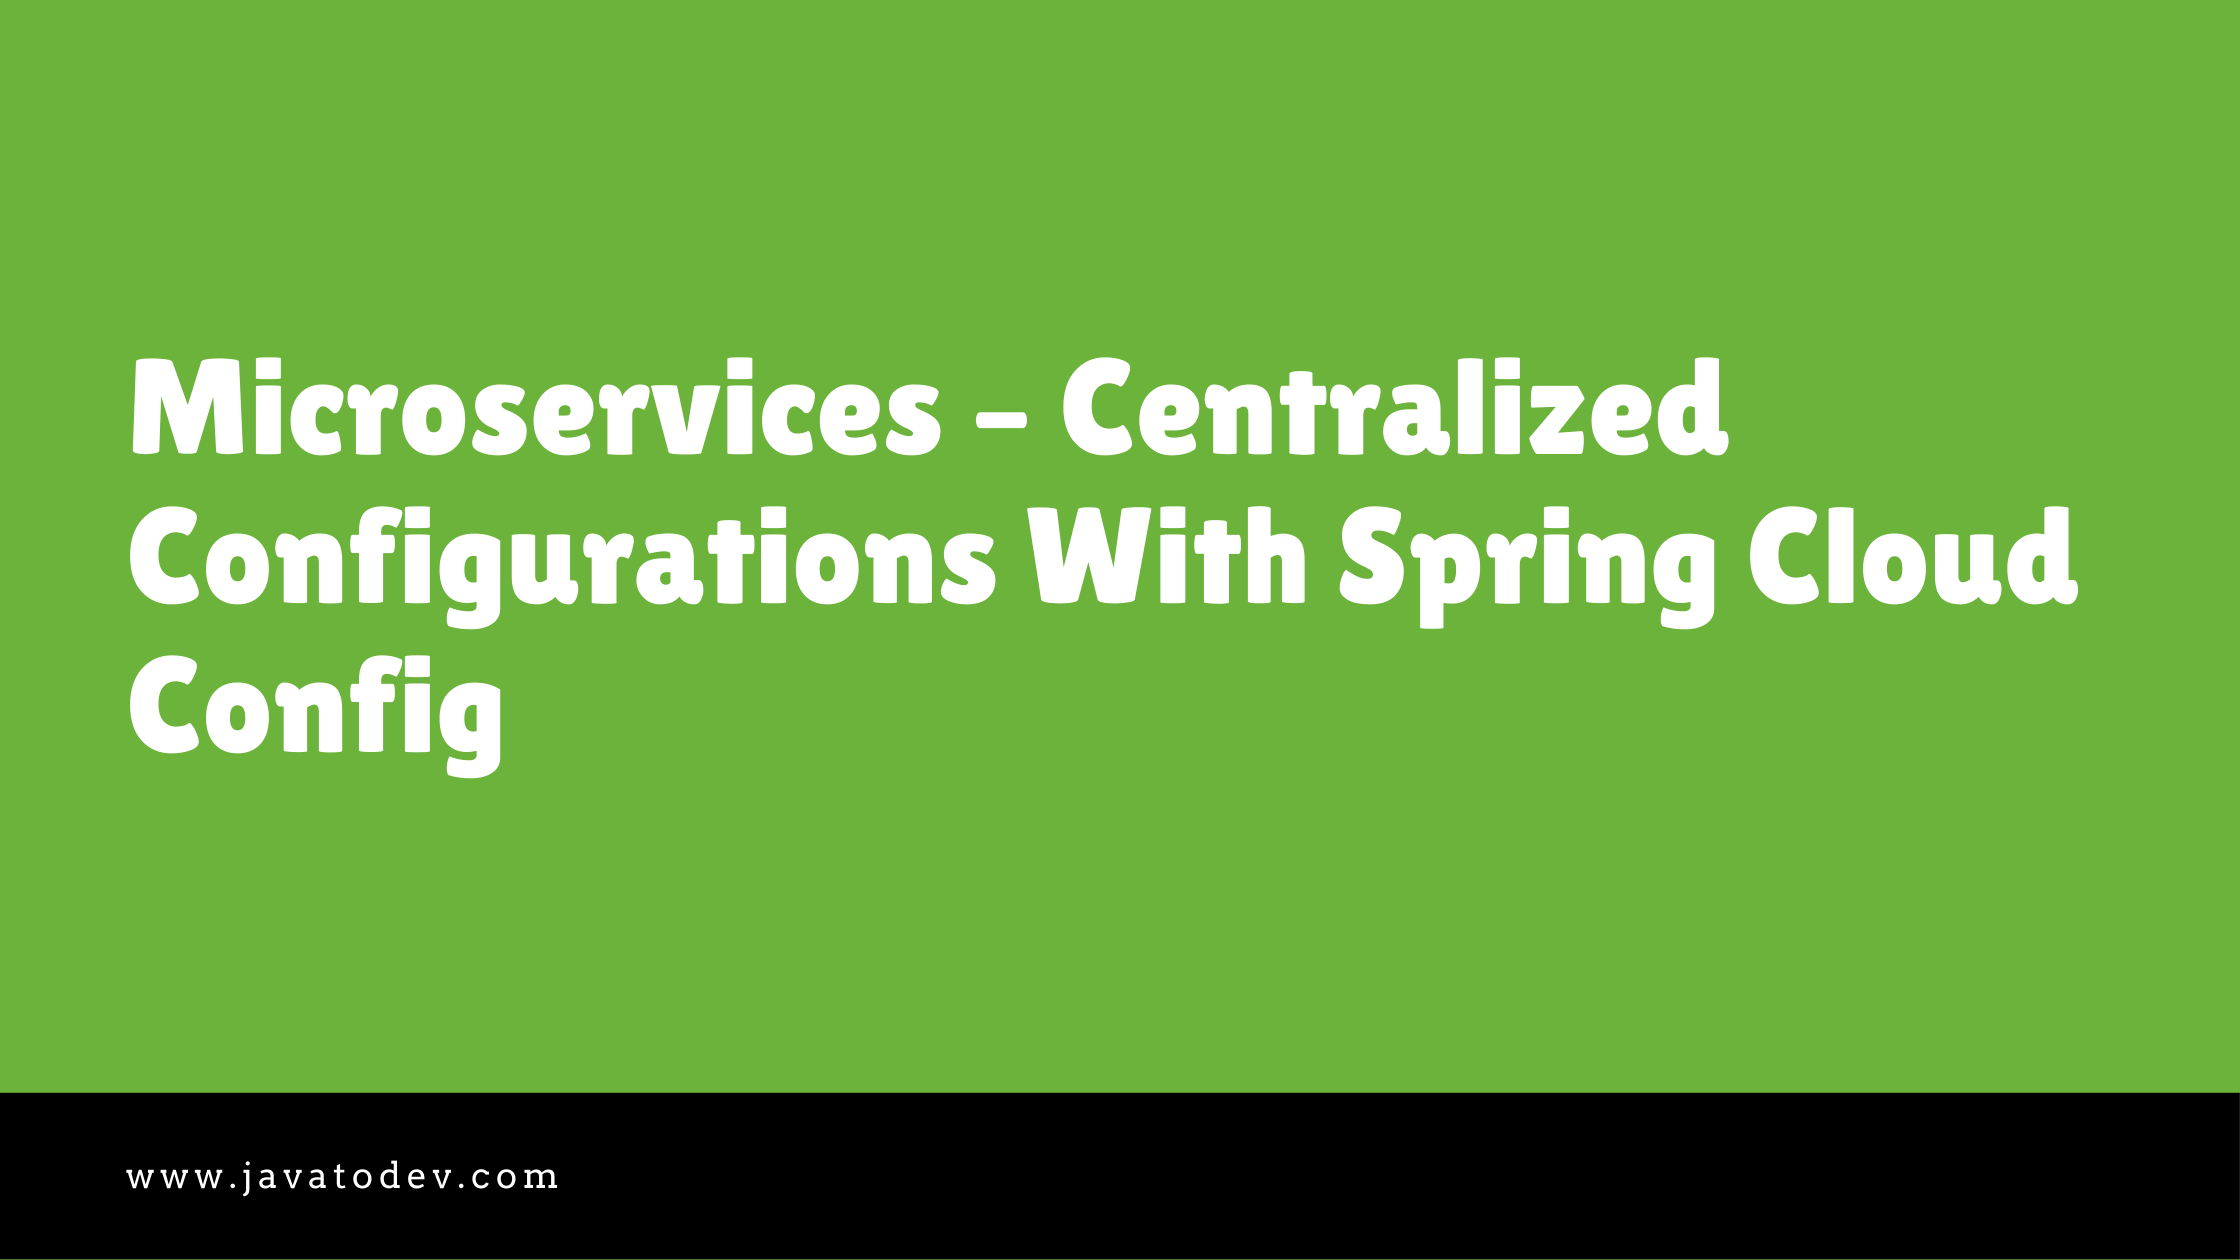 Microservices - Centralized Configurations With Spring Cloud Config